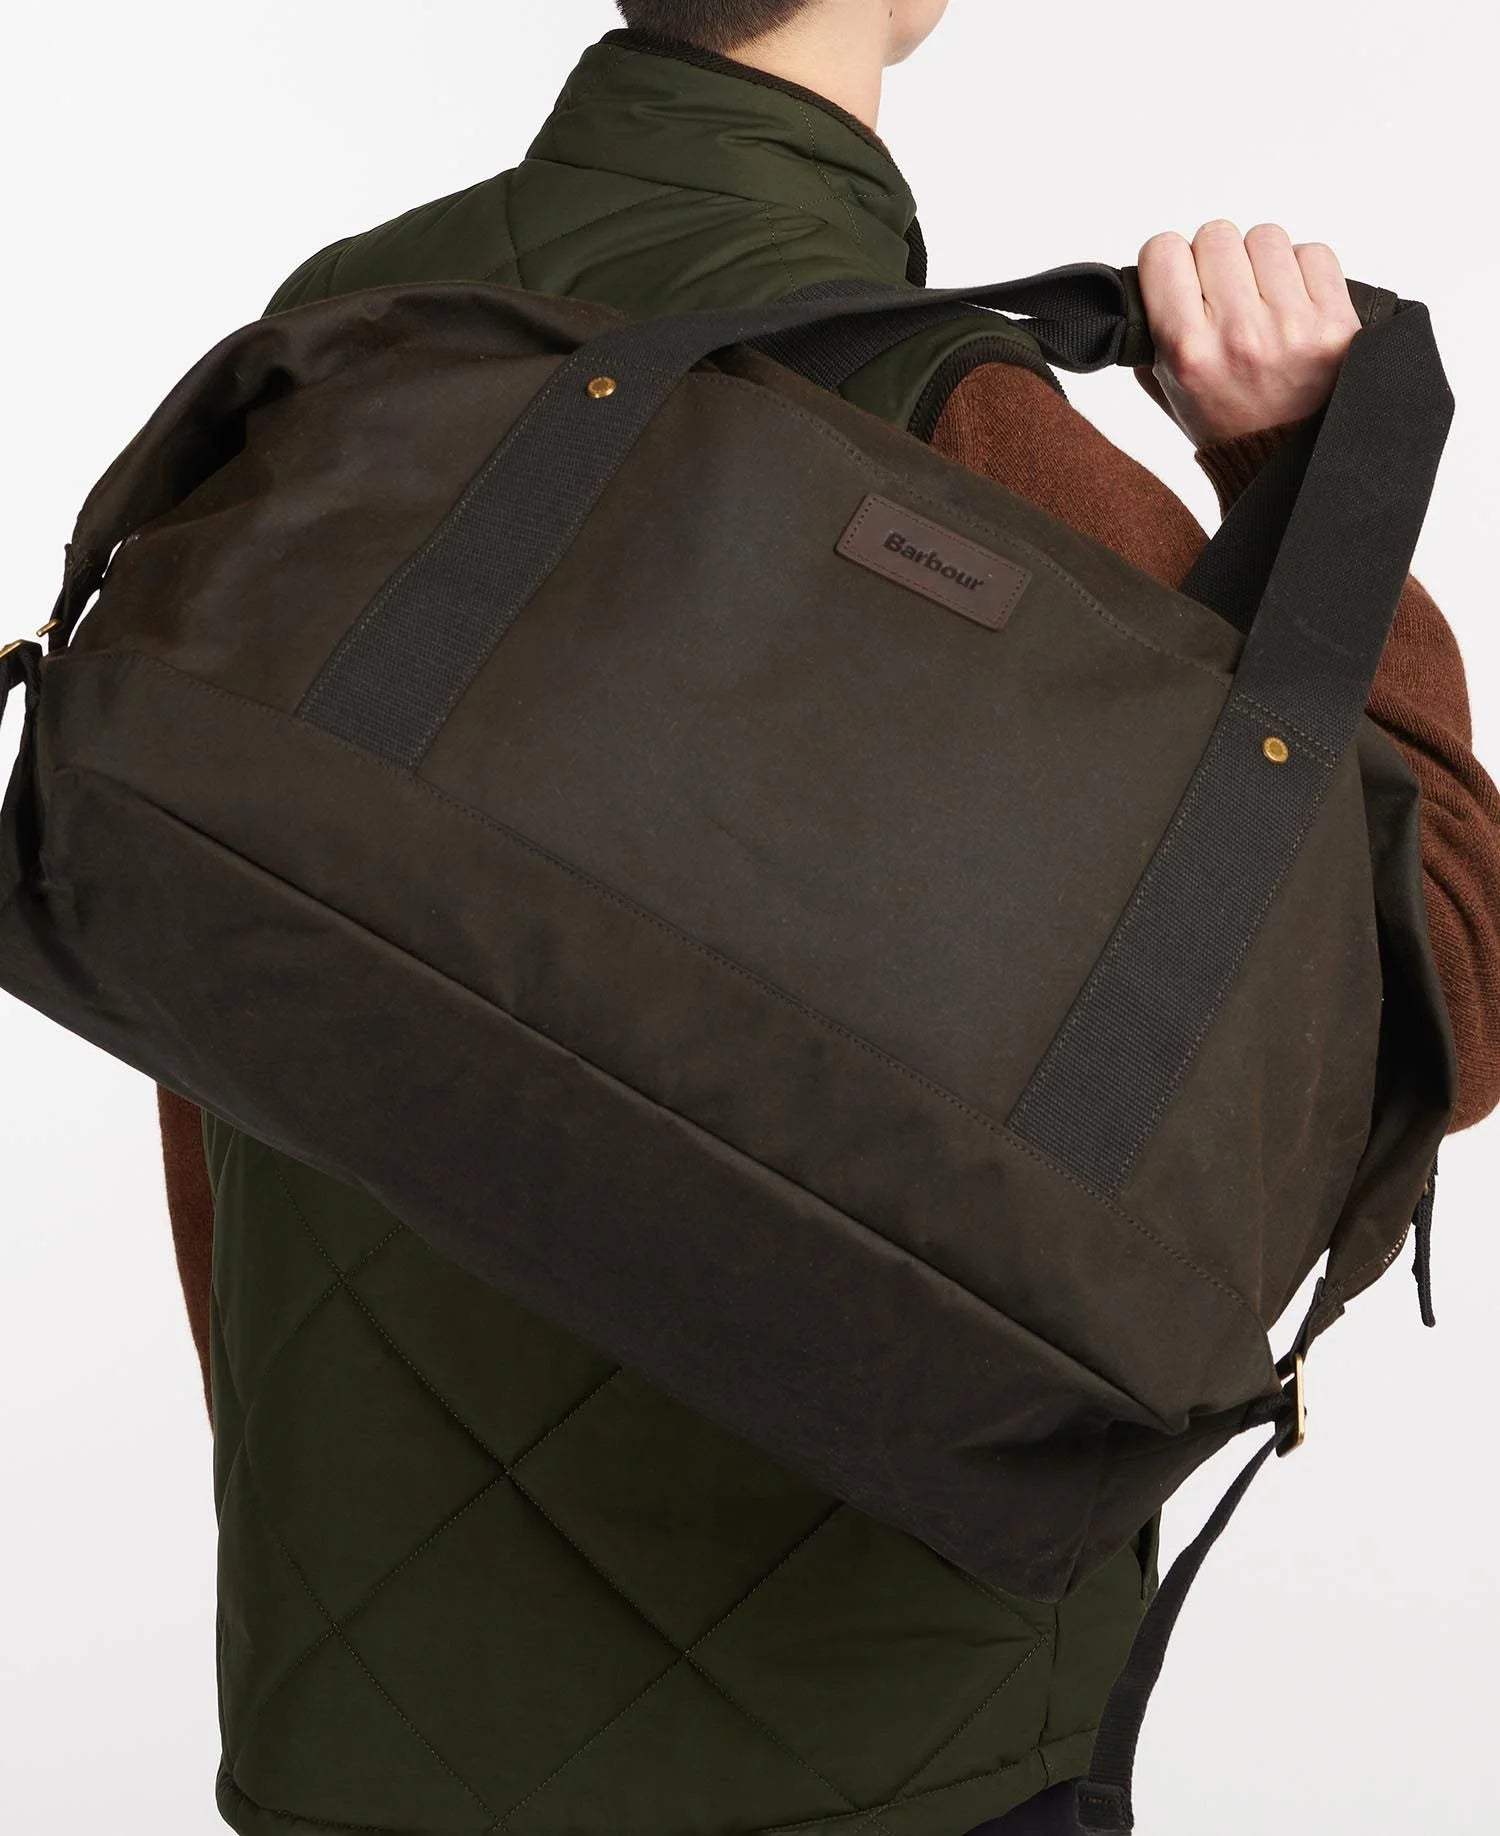 Essential Wax Holdall by Barbour - The Luxury Promotional Gifts Company Limited